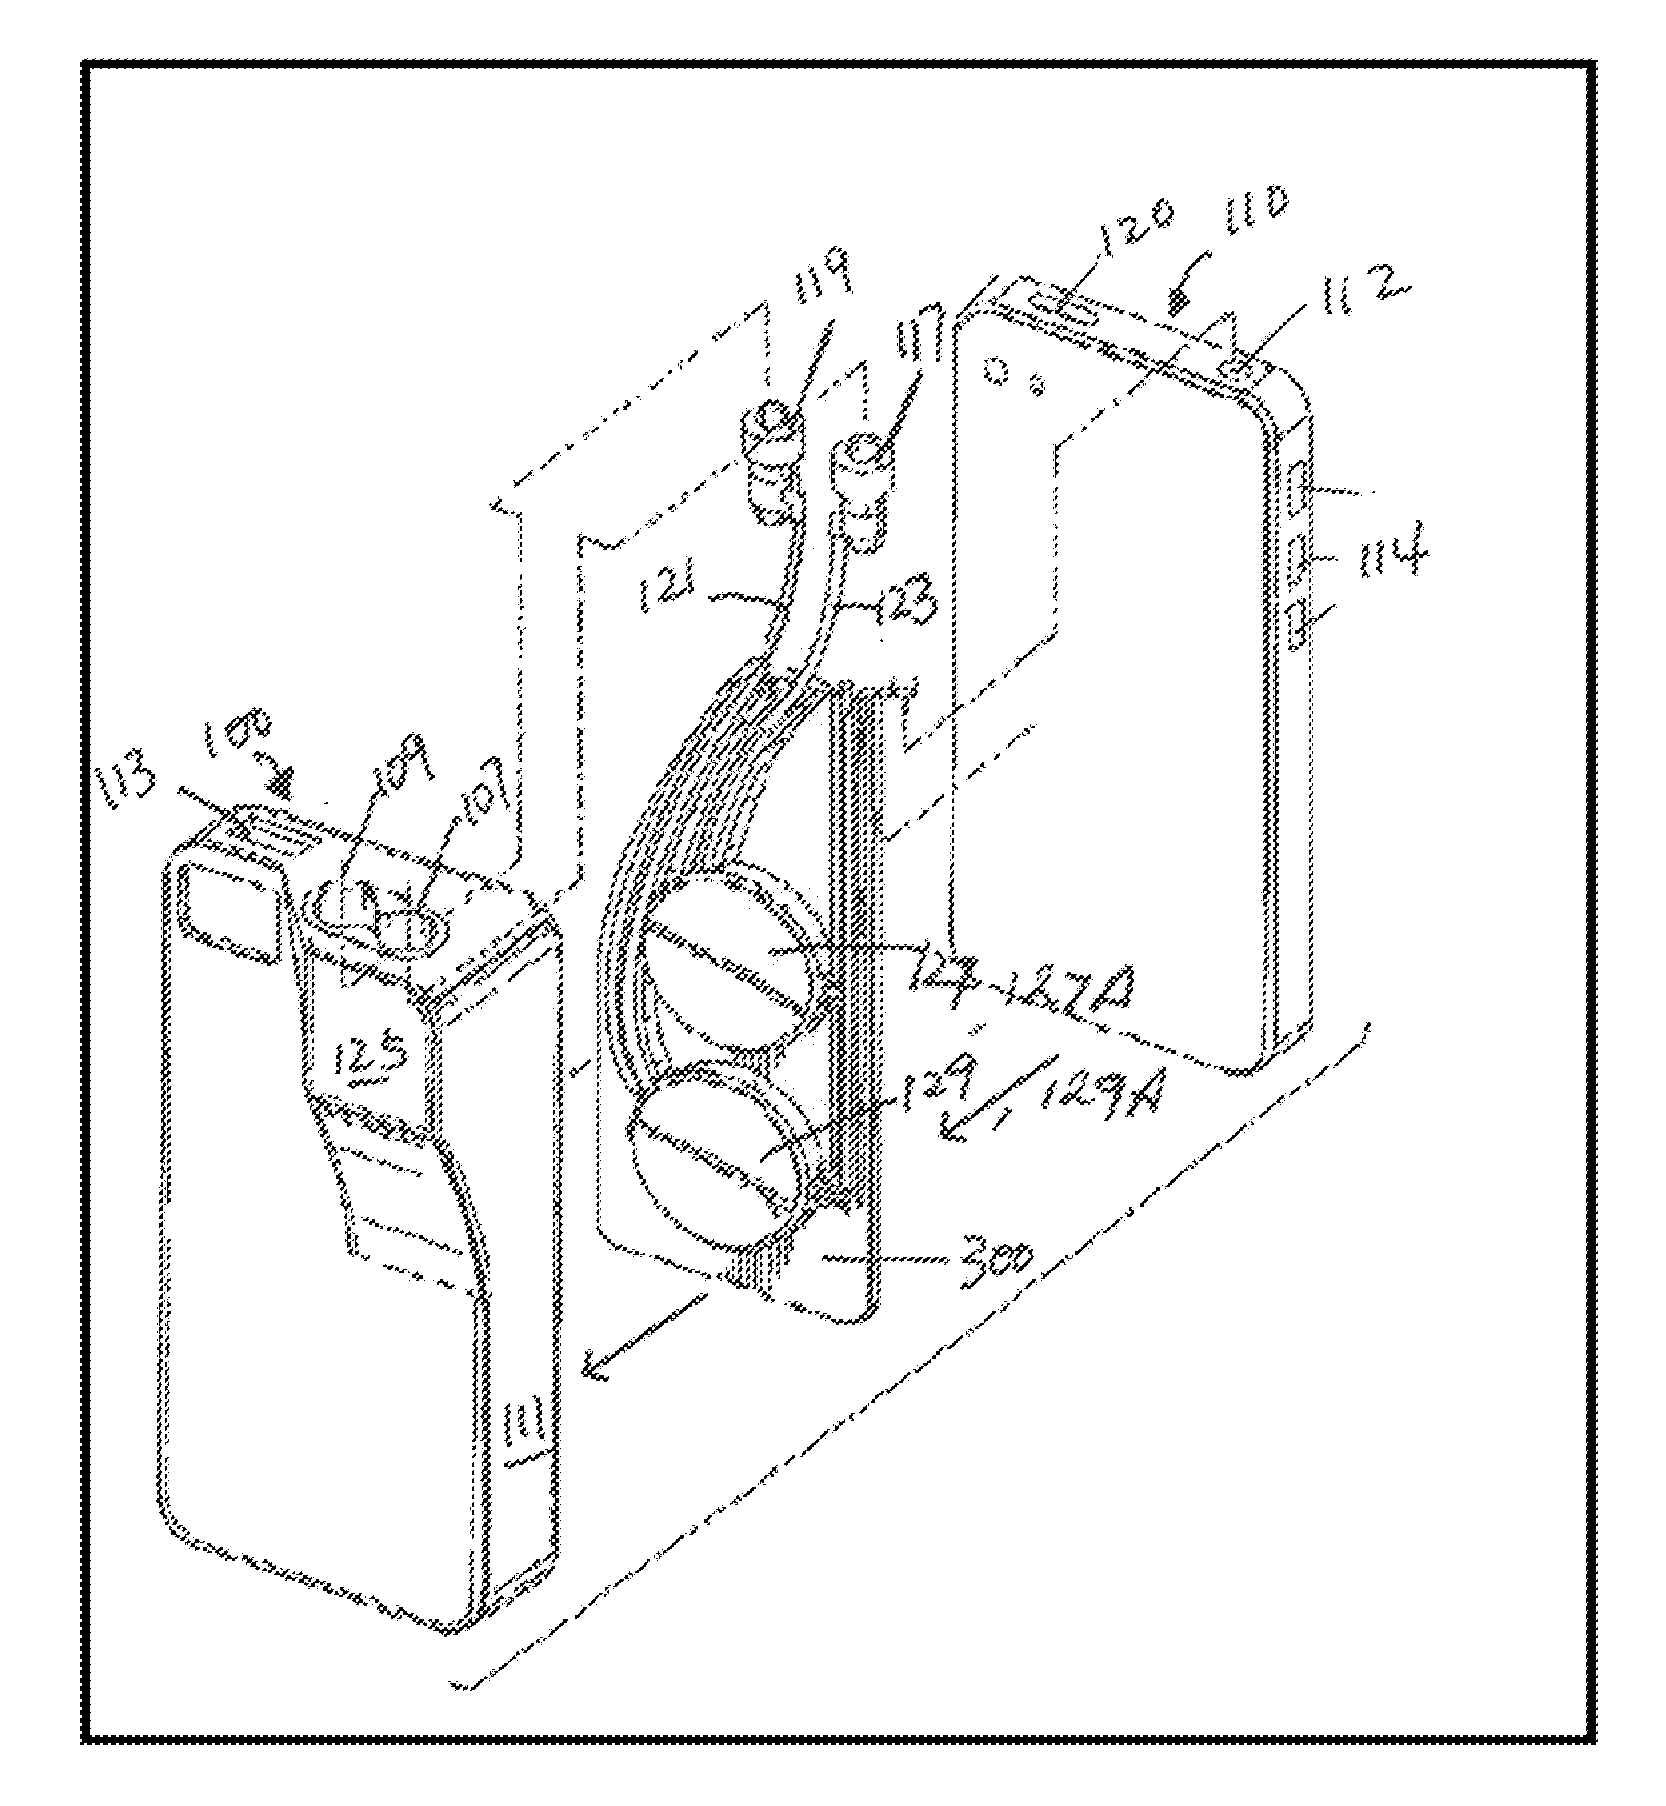 Retractable storage system for handheld electronic device